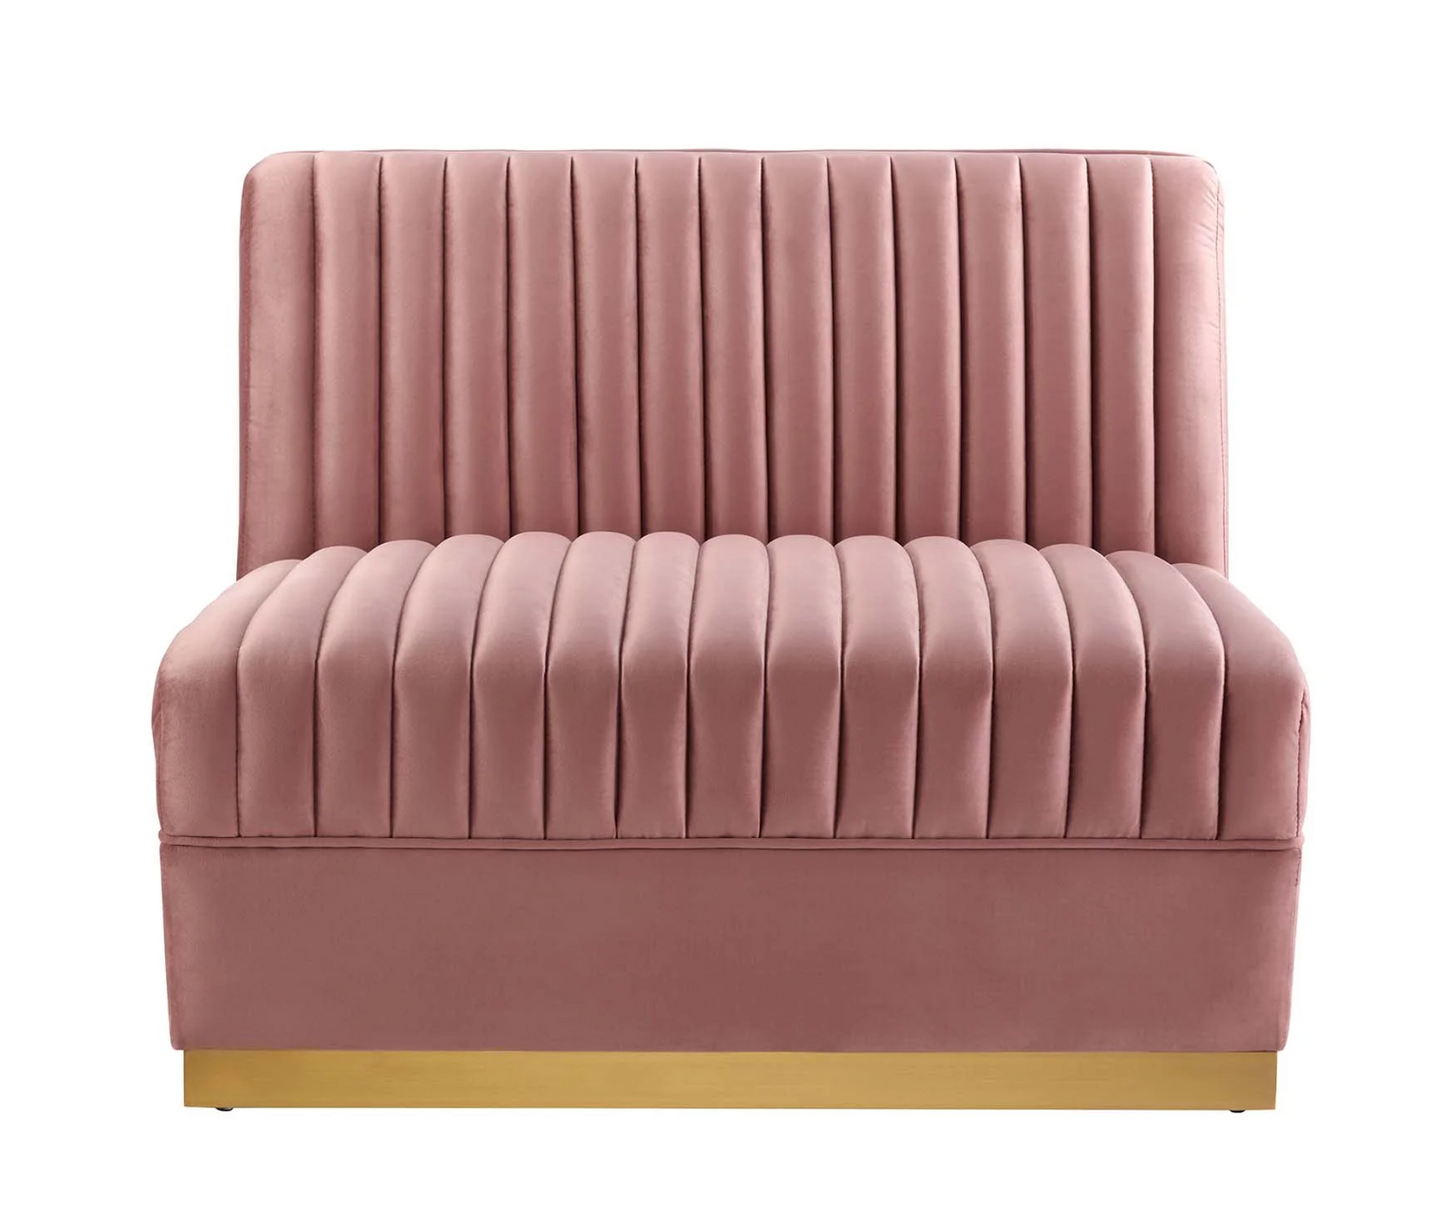 Channel Tufted Blush Pink Velvet Sectional Sofa Armless Chair